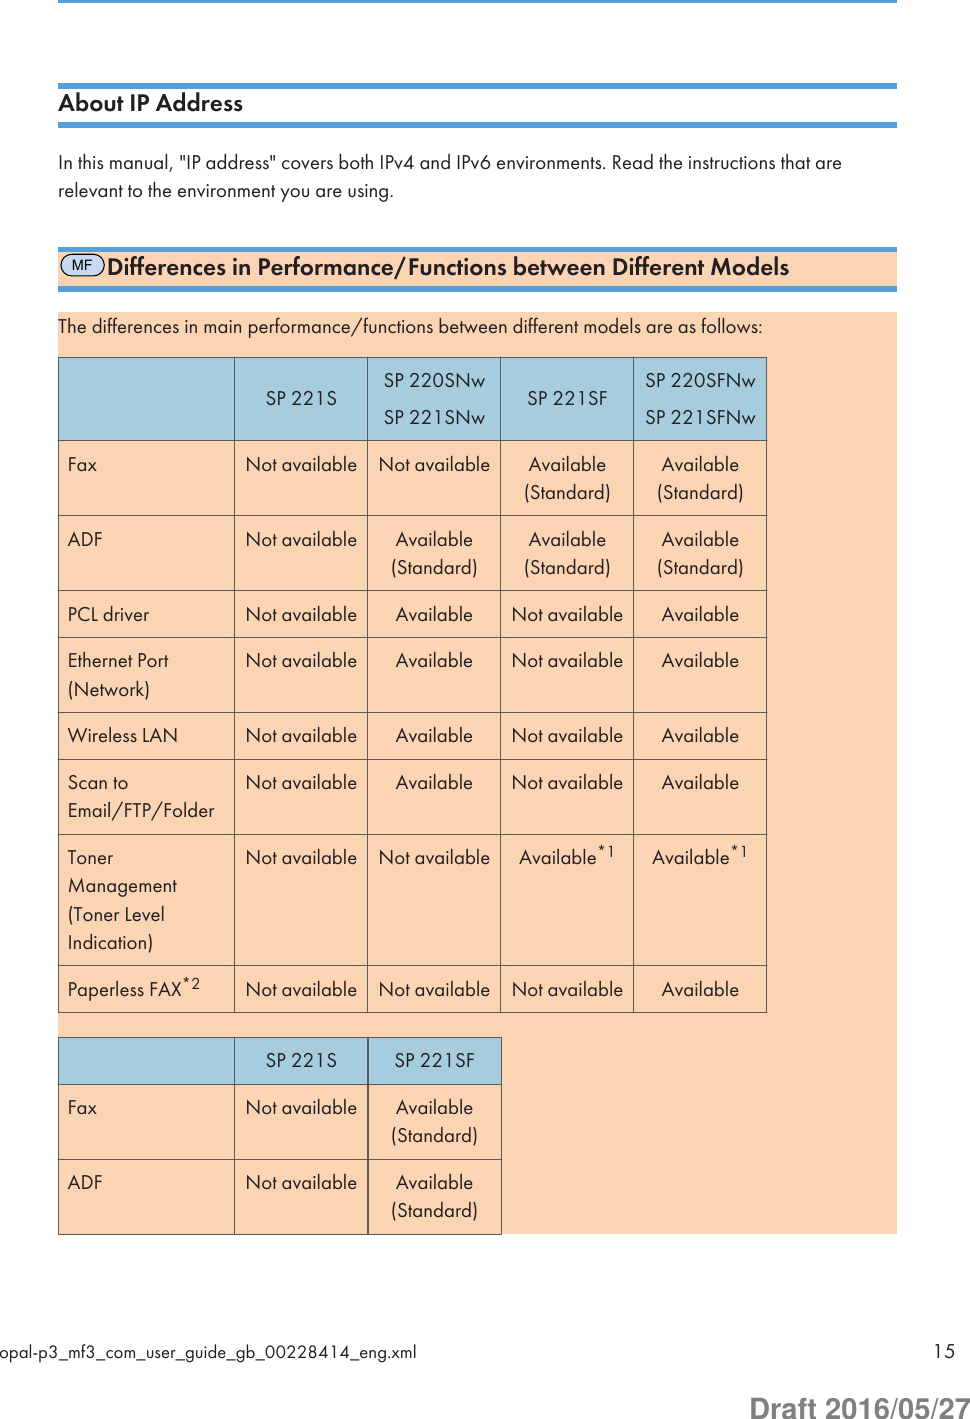 About IP AddressIn this manual, &quot;IP address&quot; covers both IPv4 and IPv6 environments. Read the instructions that arerelevant to the environment you are using.MFDifferences in Performance/Functions between Different ModelsThe differences in main performance/functions between different models are as follows:SP 221S SP 220SNwSP 221SNw SP 221SF SP 220SFNwSP 221SFNwFax Not available Not available Available(Standard)Available(Standard)ADF Not available Available(Standard)Available(Standard)Available(Standard)PCL driver Not available Available Not available AvailableEthernet Port(Network)Not available Available Not available AvailableWireless LAN Not available Available Not available AvailableScan toEmail/FTP/FolderNot available Available Not available AvailableTonerManagement(Toner LevelIndication)Not available Not available Available*1 Available*1Paperless FAX*2 Not available Not available Not available AvailableSP 221S SP 221SFFax Not available Available(Standard)ADF Not available Available(Standard)opal-p3_mf3_com_user_guide_gb_00228414_eng.xml 15Draft 2016/05/27